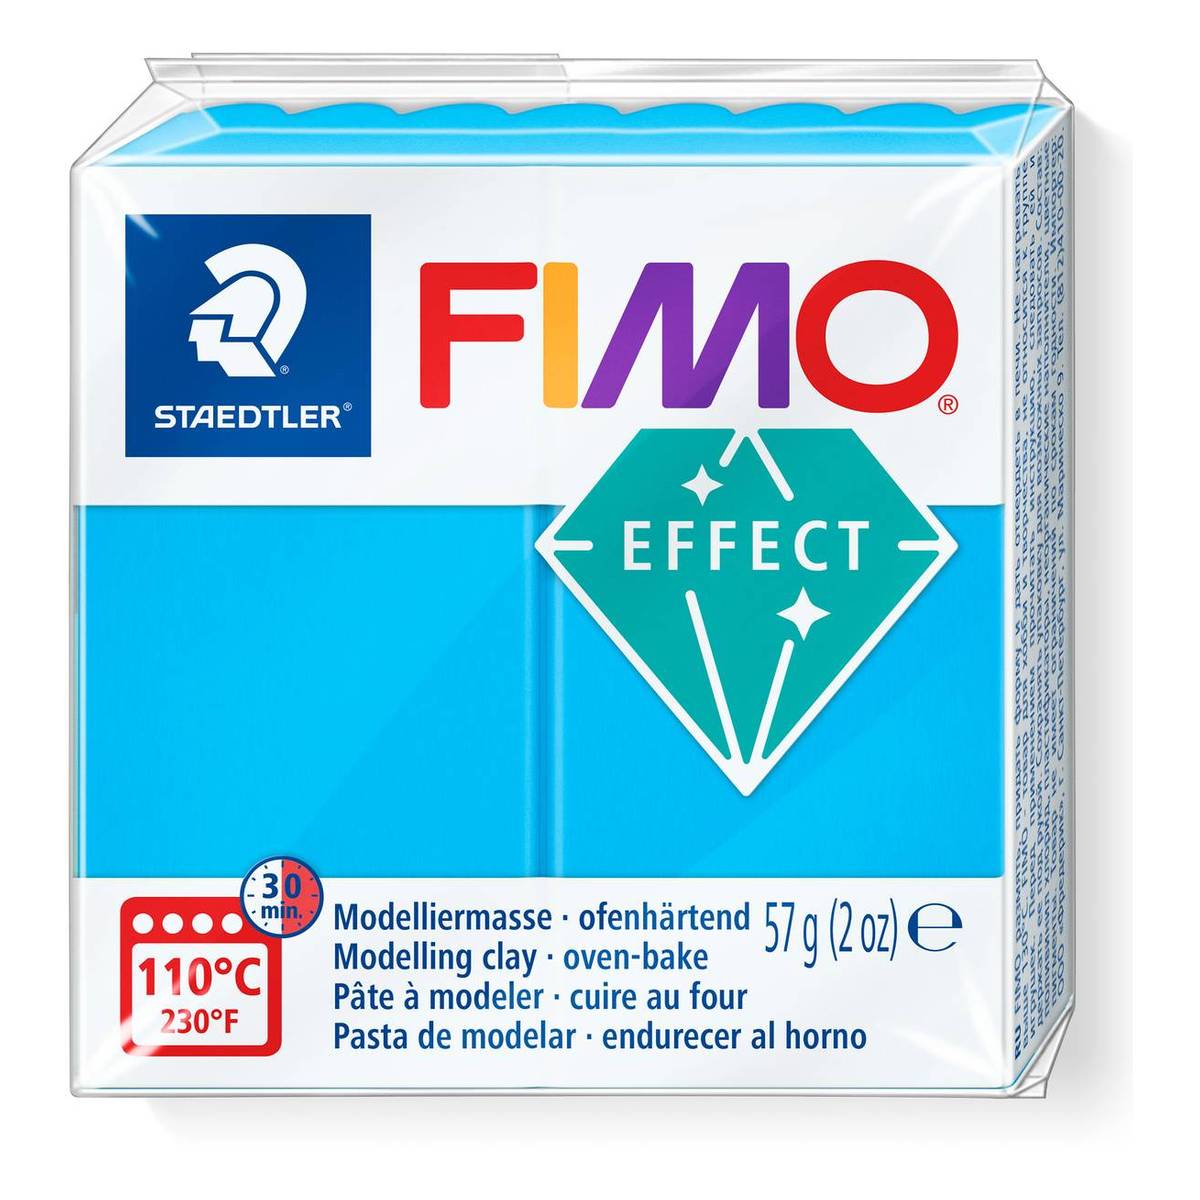 Fimo Effect Translucent Blue Modelling Clay 56g